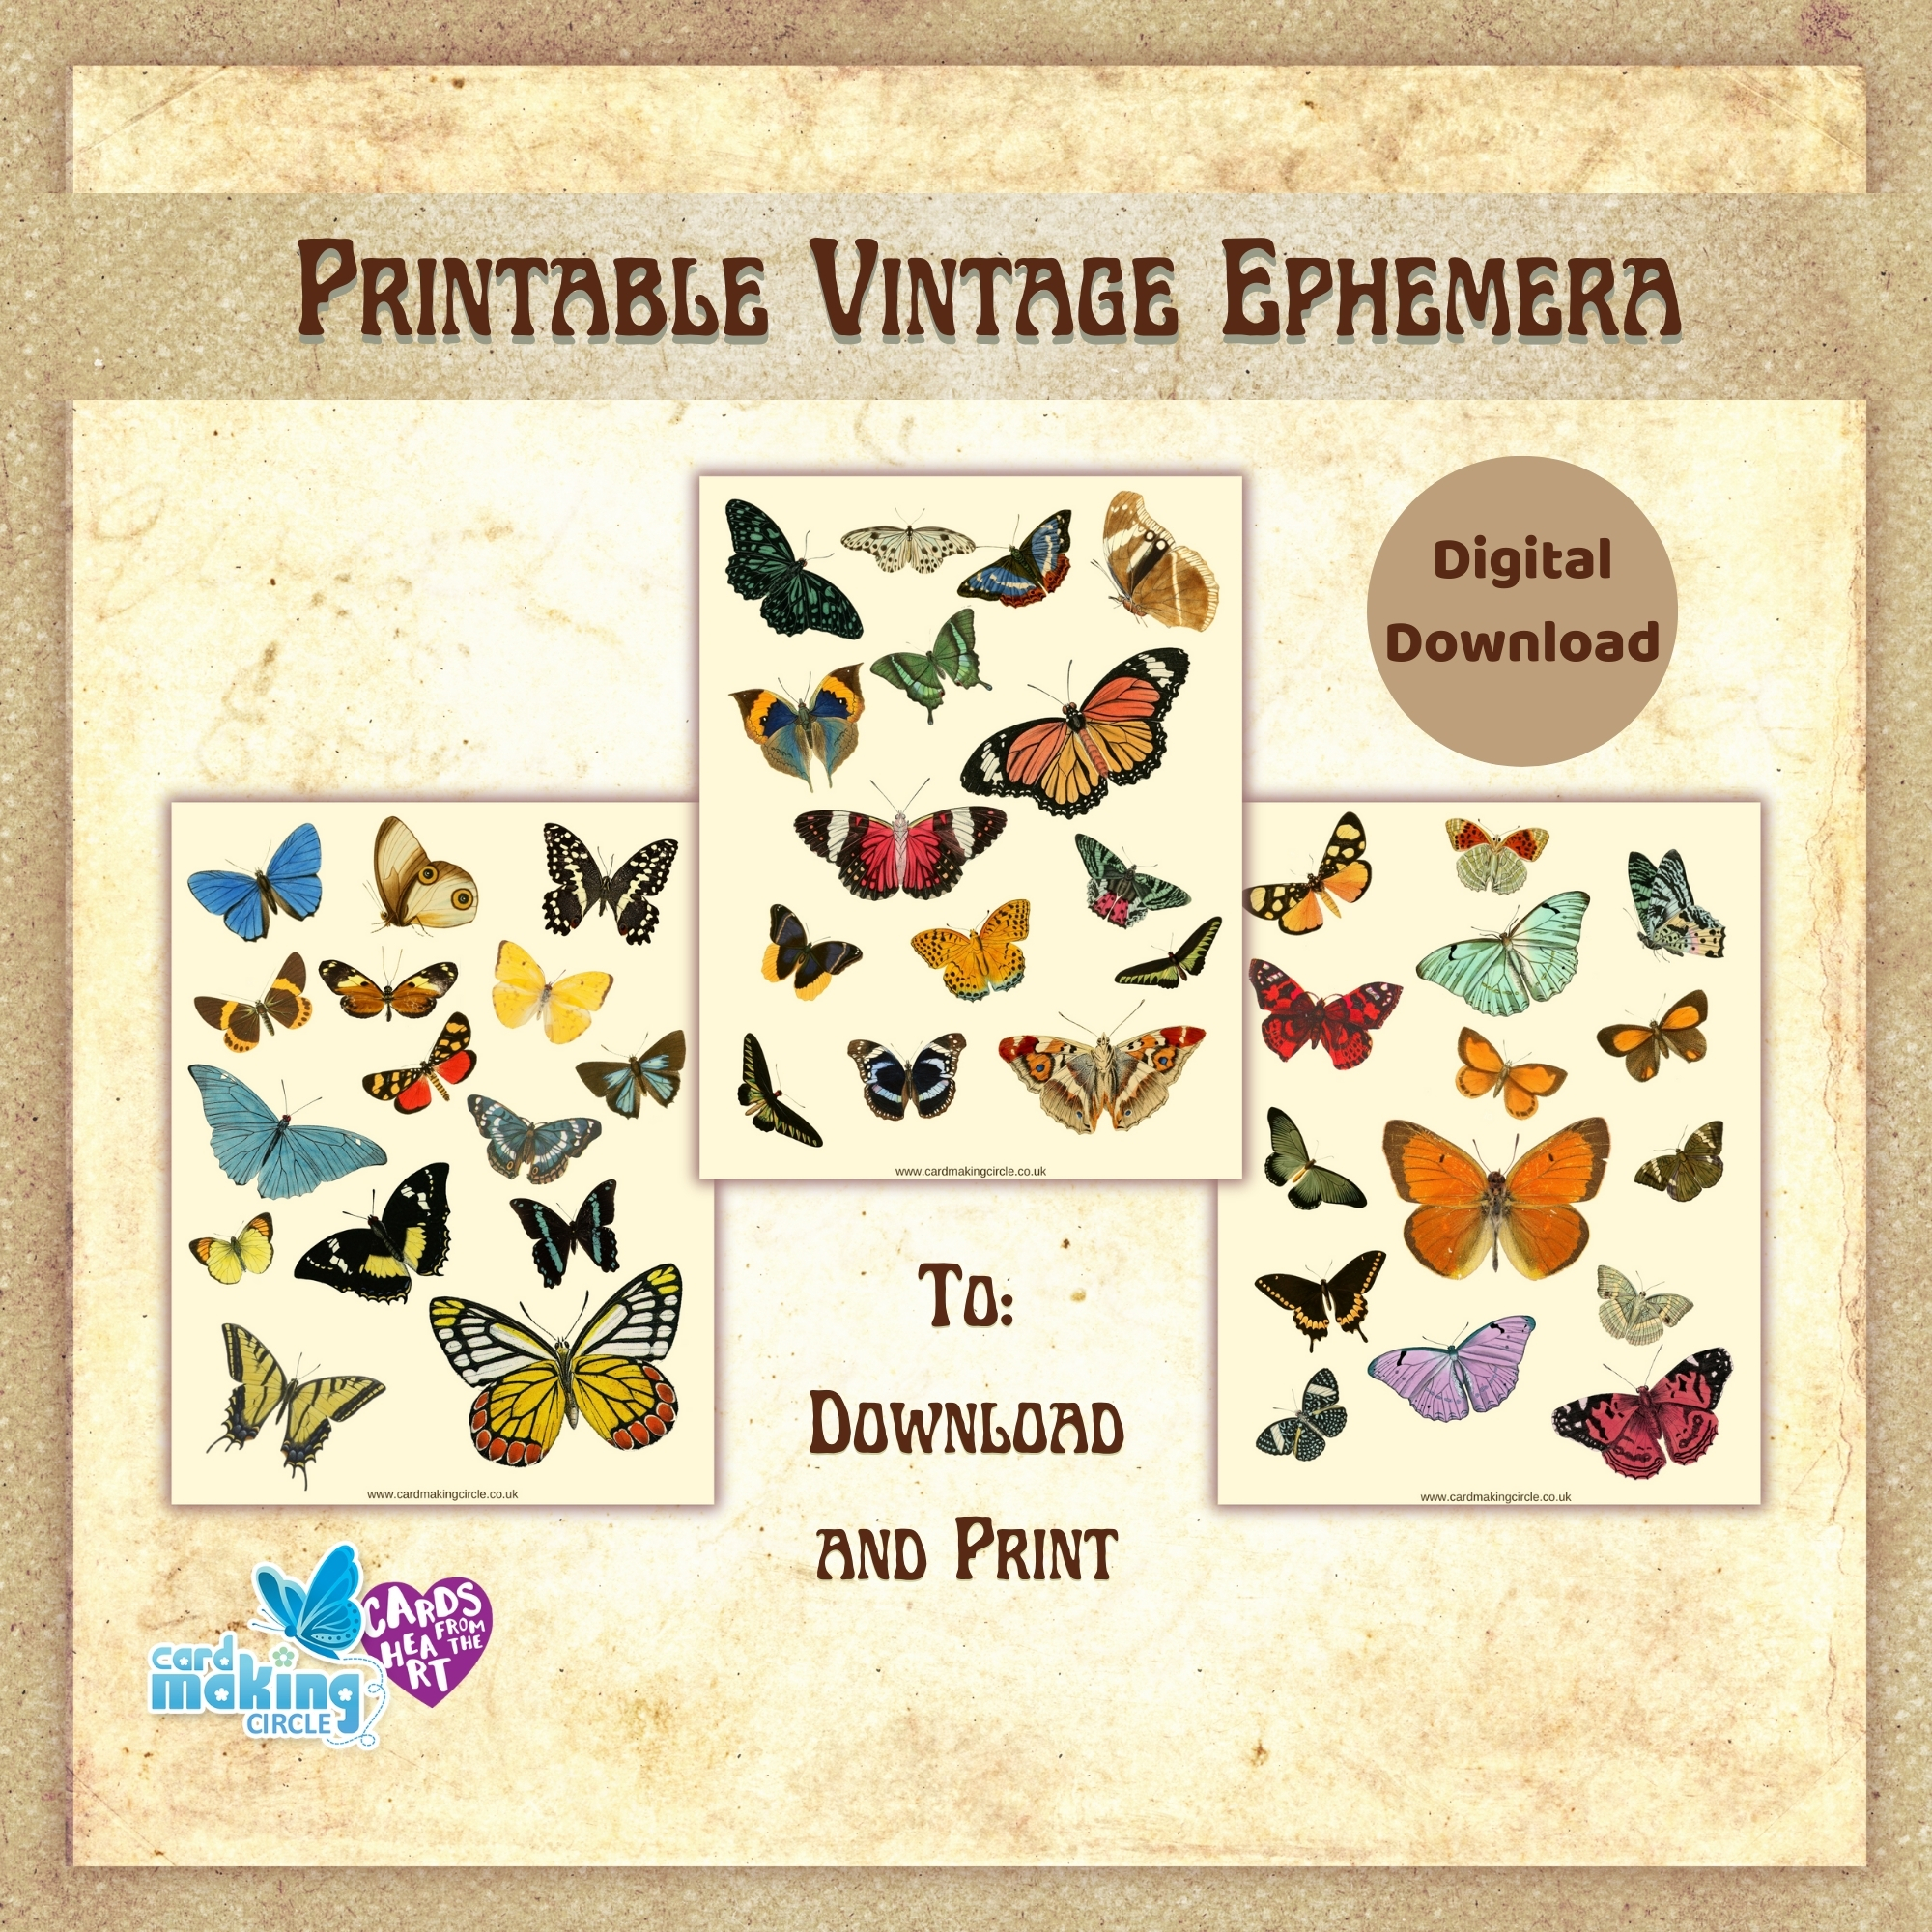 Printable digital card making kits and greeting cards for you to download and print at home.